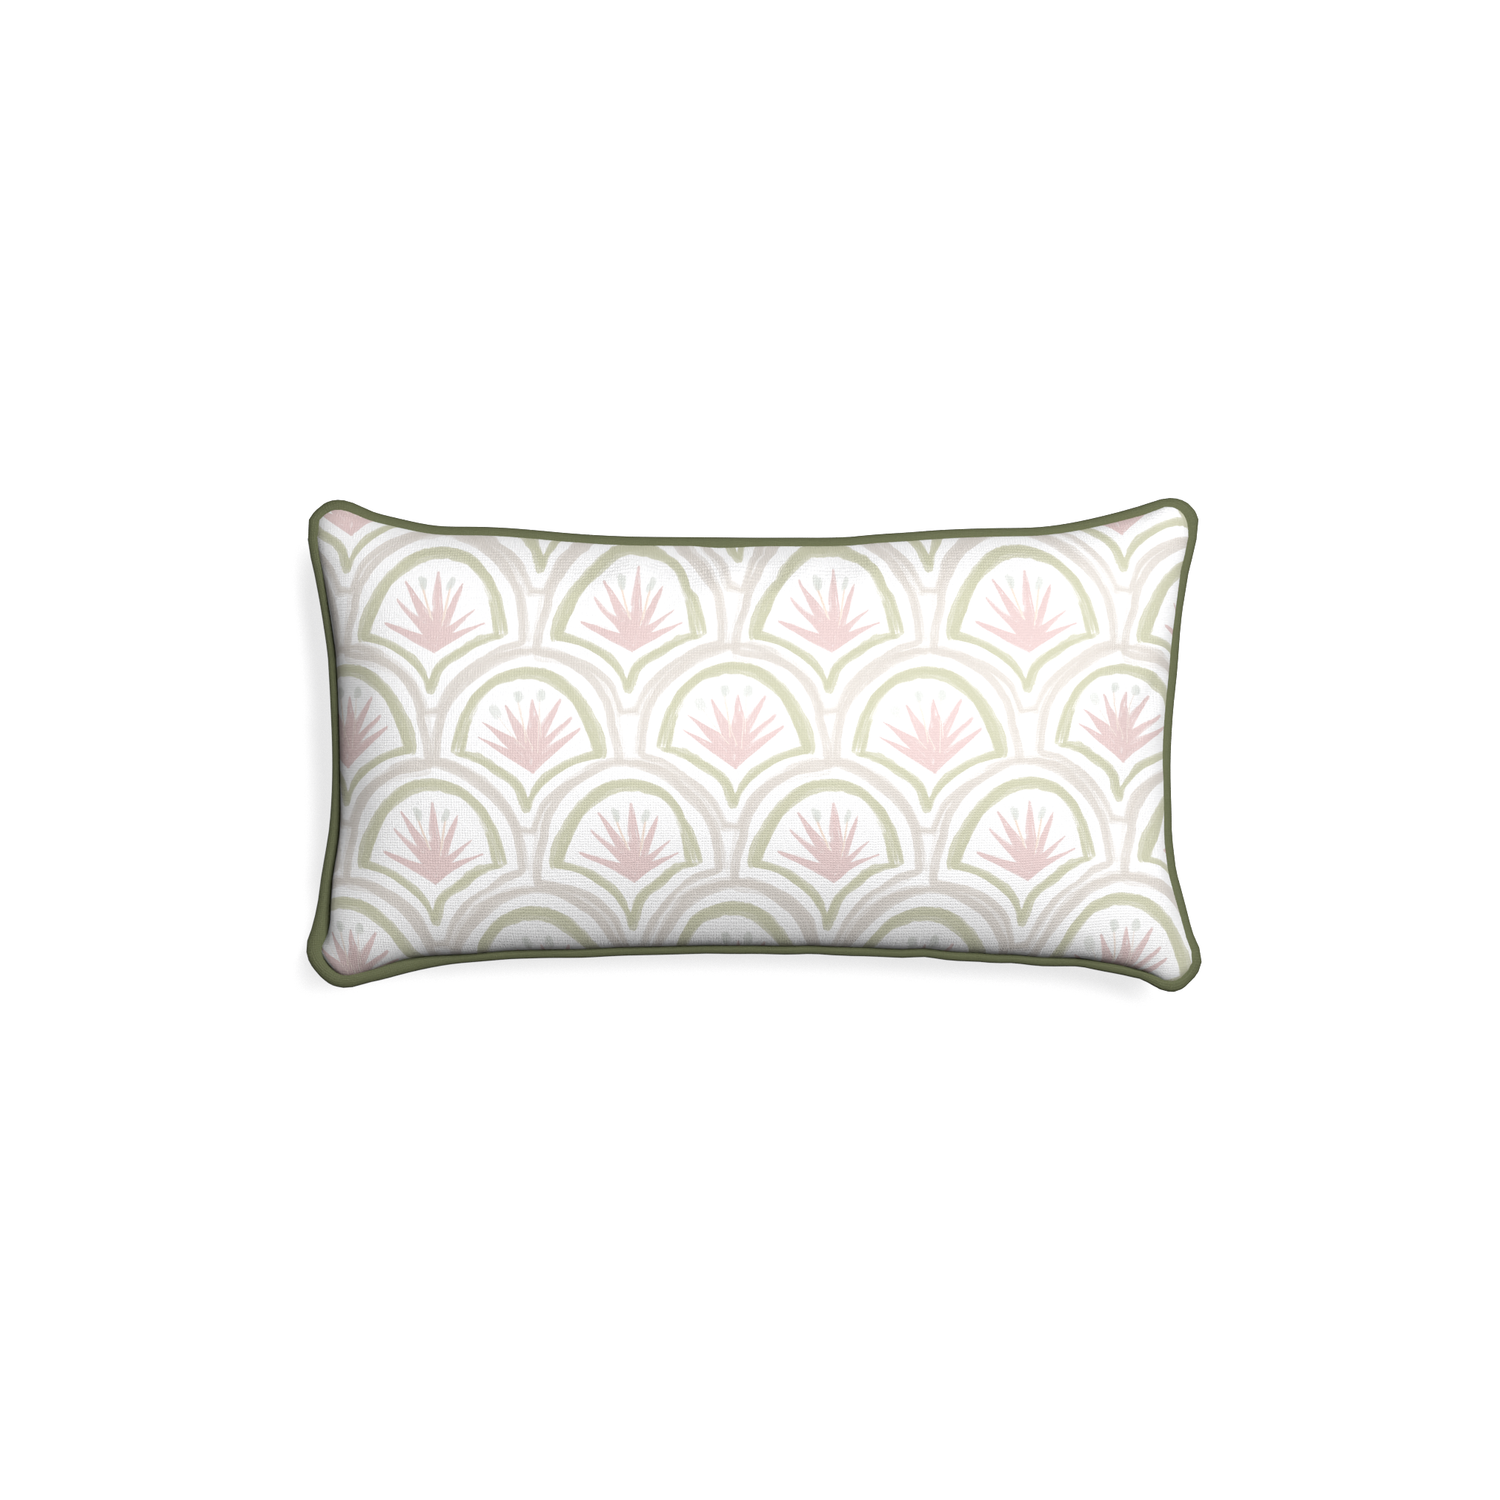 Petite-lumbar thatcher rose custom pink & green palmpillow with f piping on white background